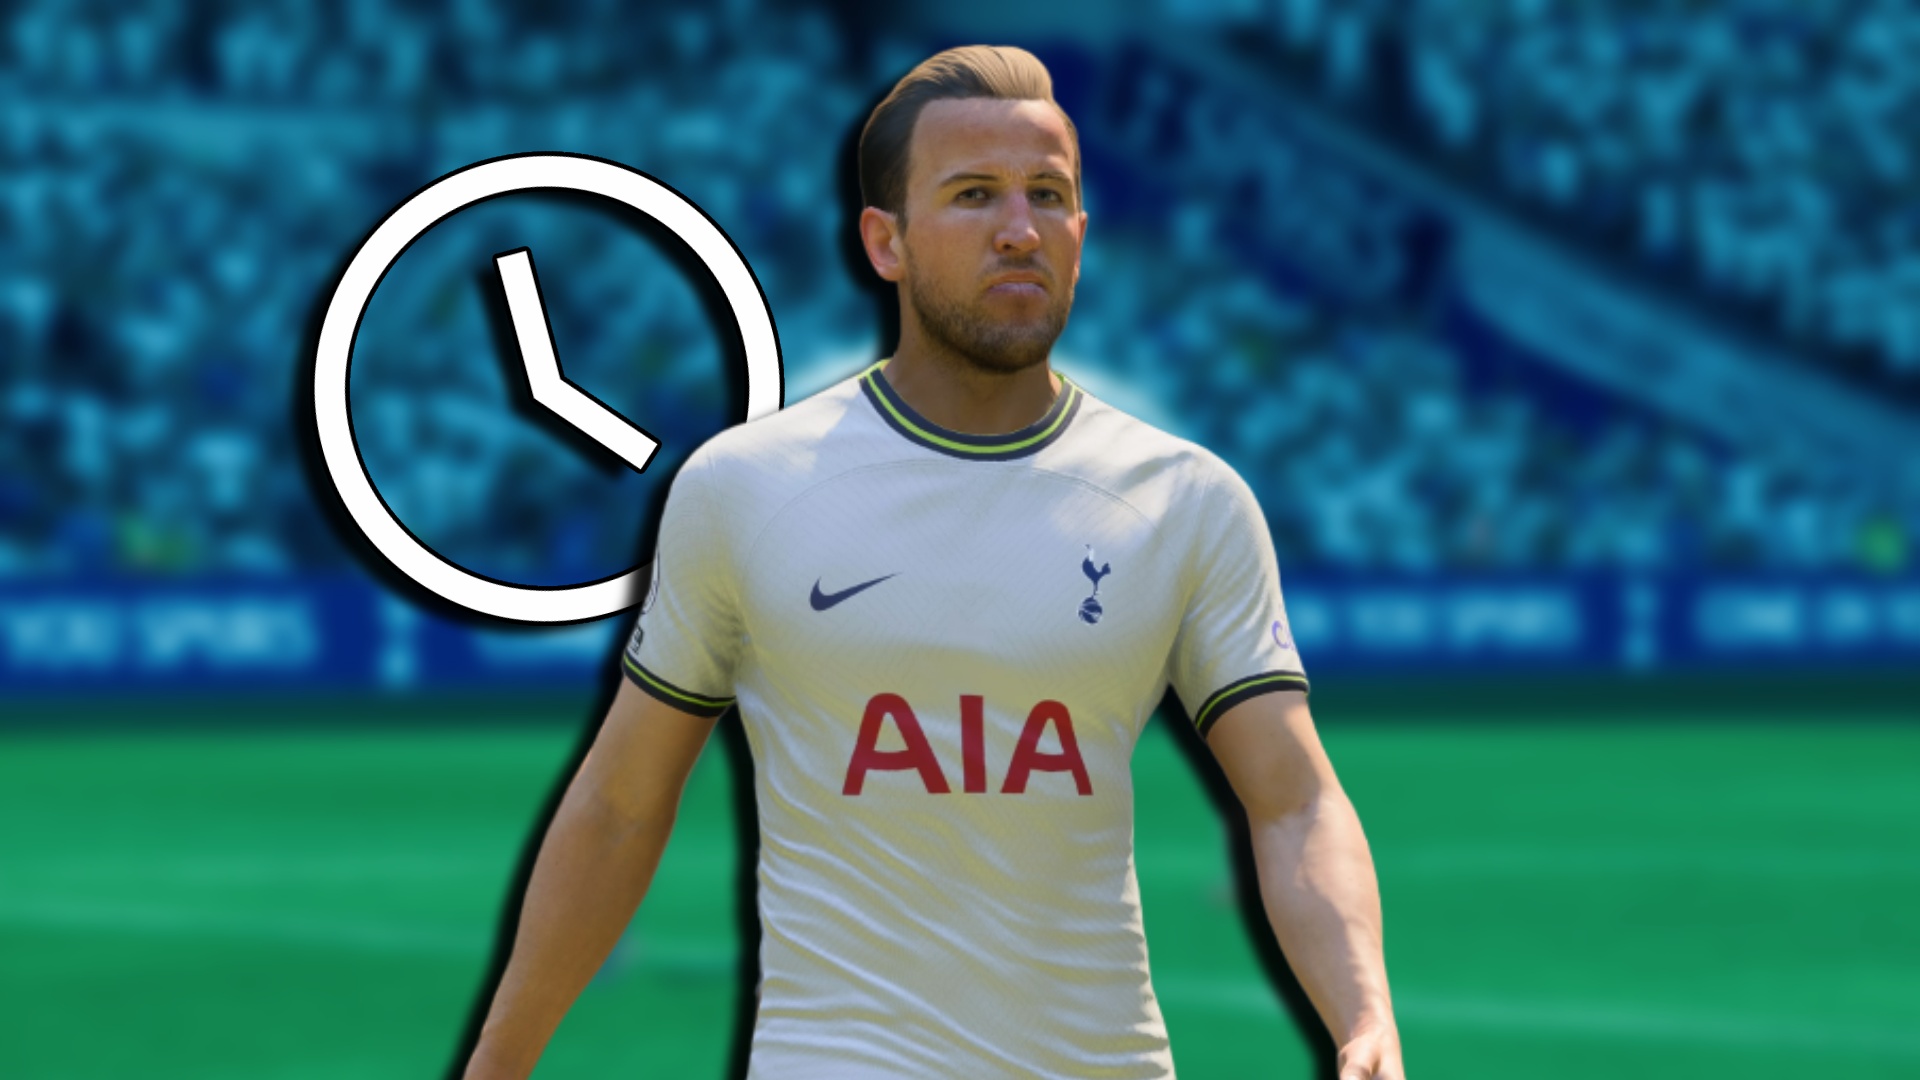 Releasing Spurs players on EA FC 24 to see where they would go